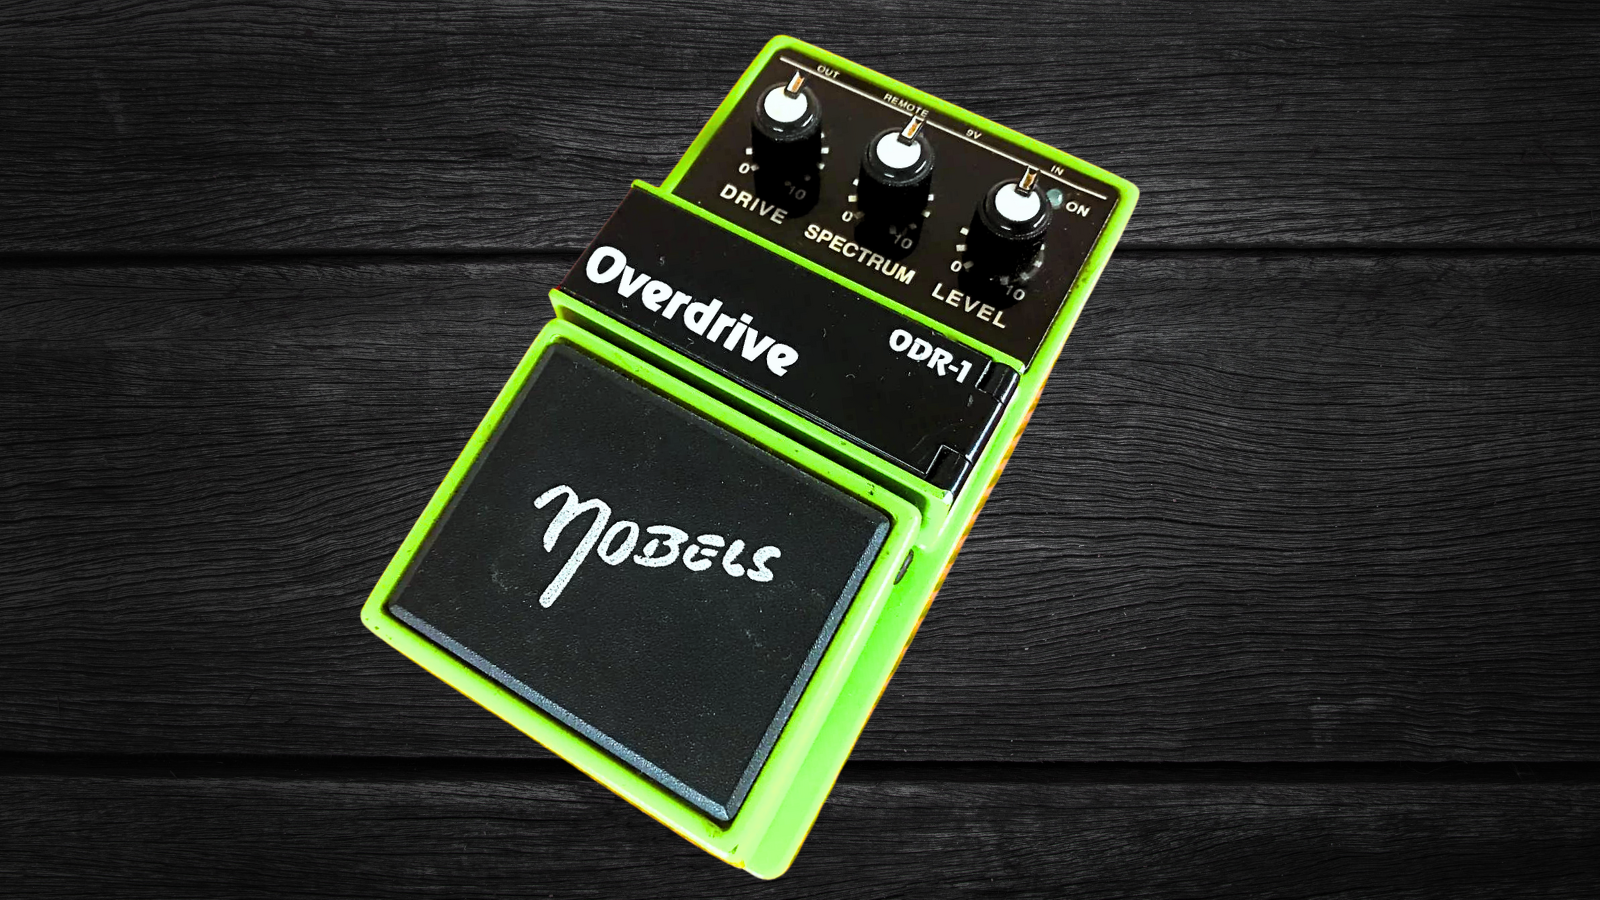 Overdrive: A feature with an awesome name and an often